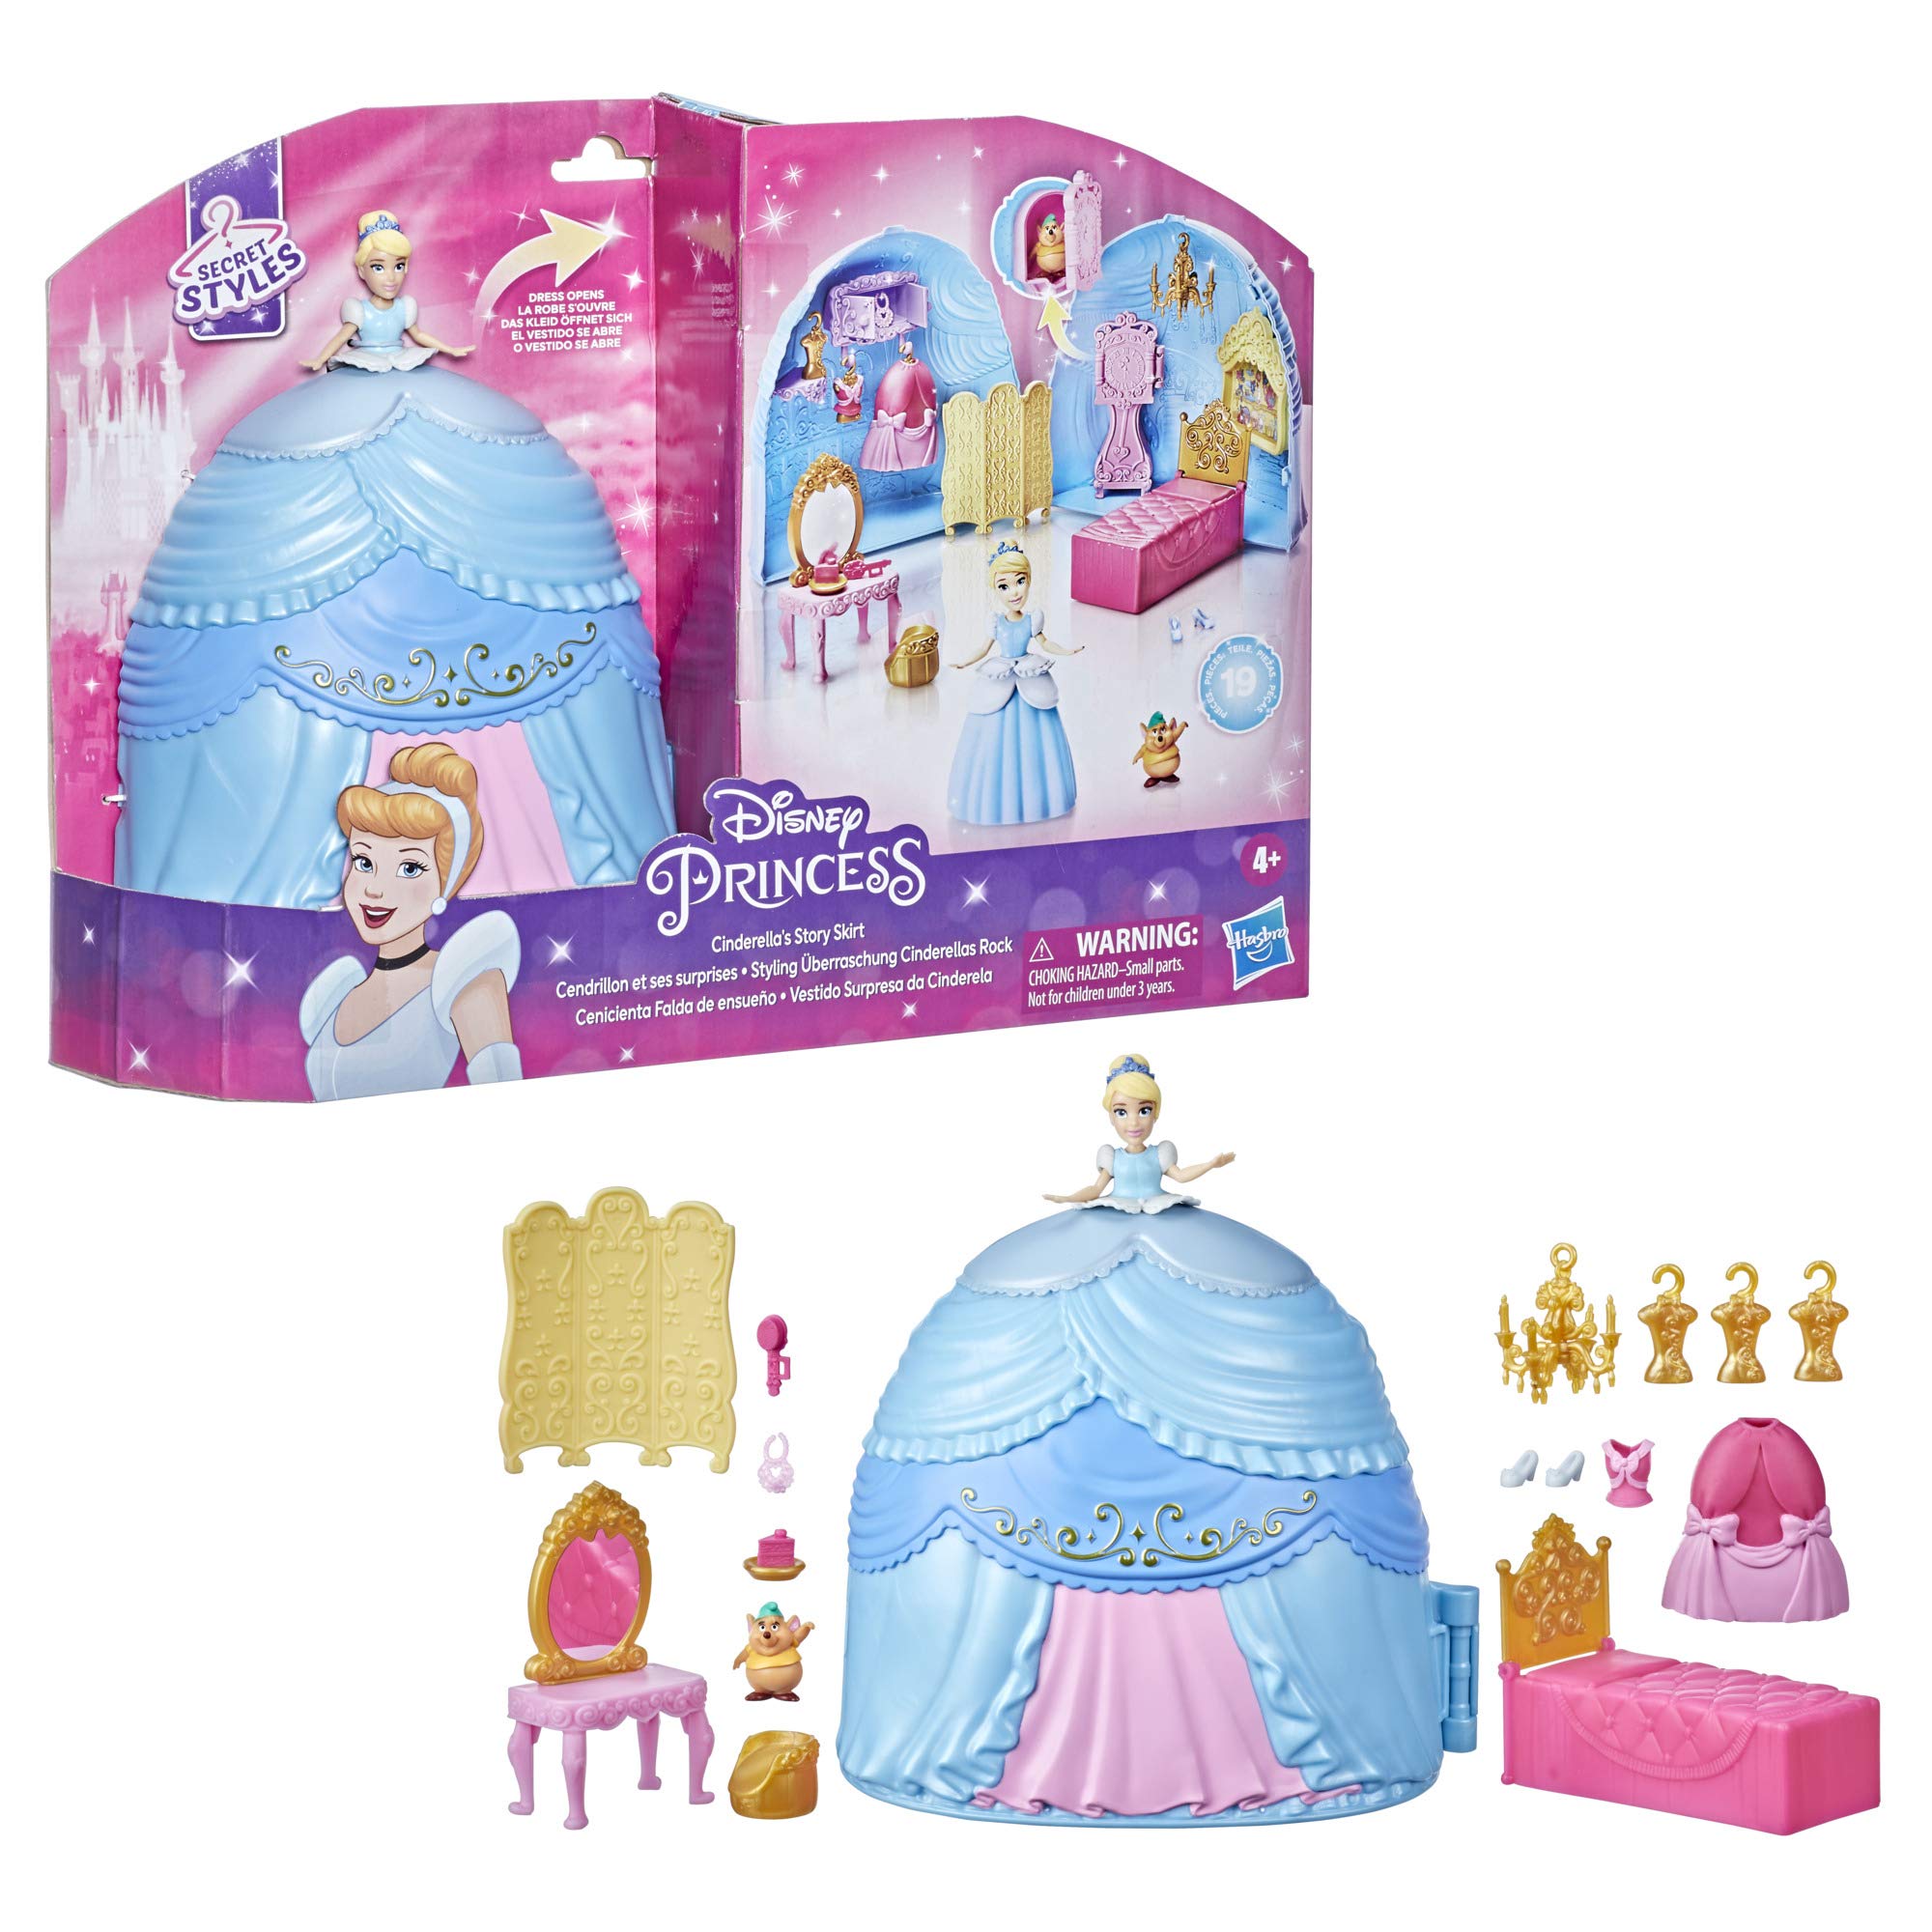 Disney Princess Secret Styles Cinderella Story Skirt, Playset with Doll, Furniture, and Extra Fashions, Toy for Girls 4 Years Old and Up